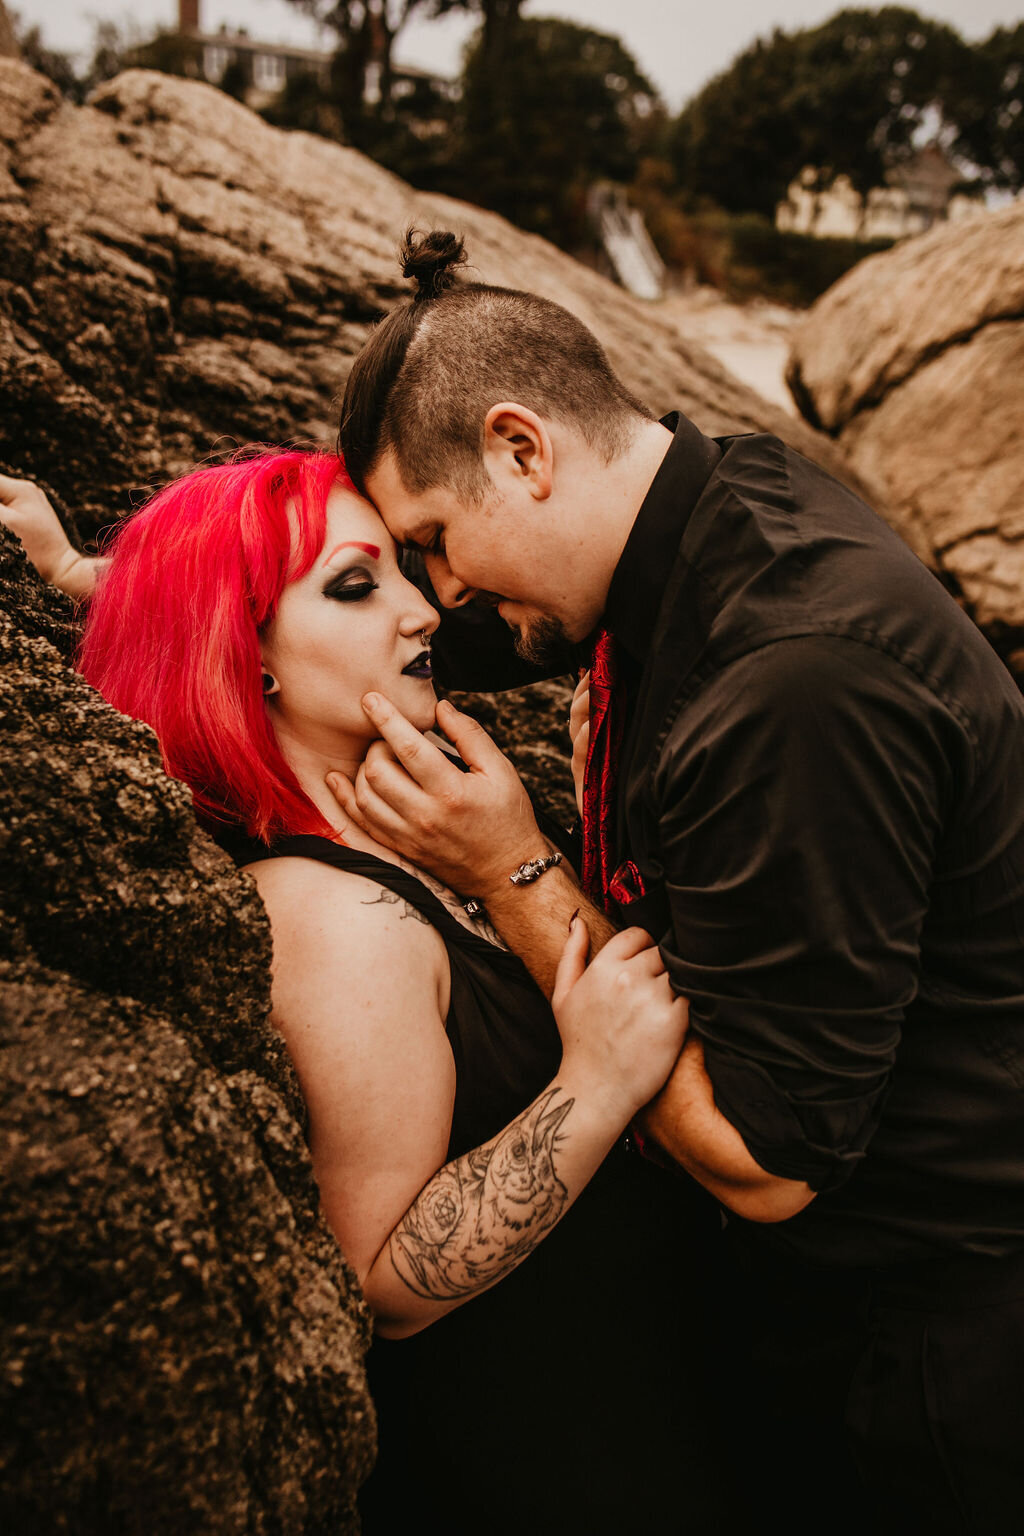 Katy-Andy-Manchester-Massachusetts-Engagment-Session-Ruby-Jean-Photography-66